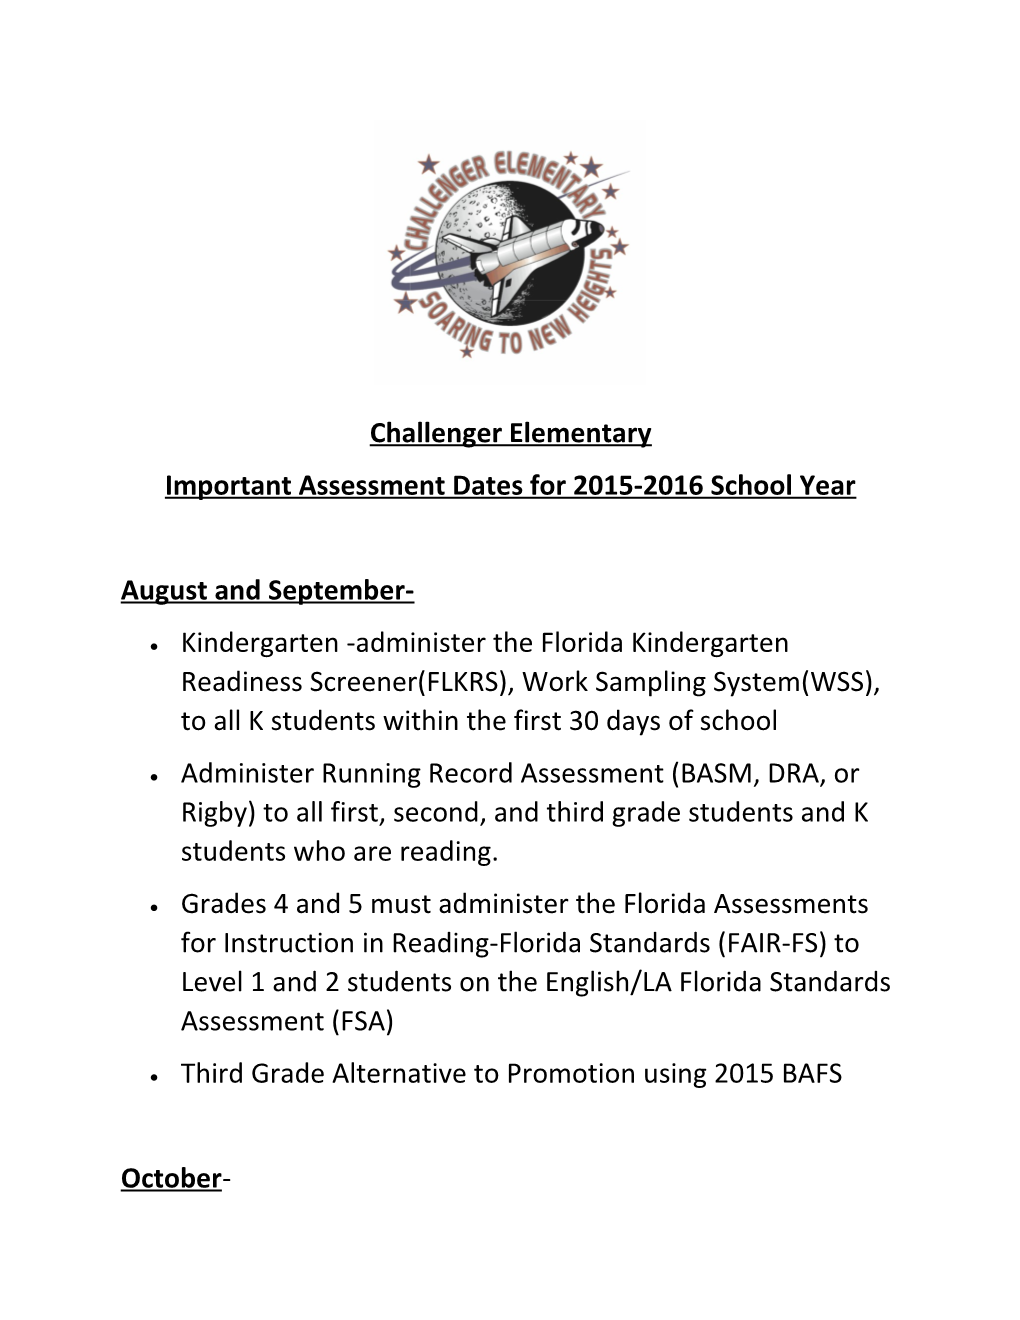 Important Assessment Dates for 2015-2016 School Year